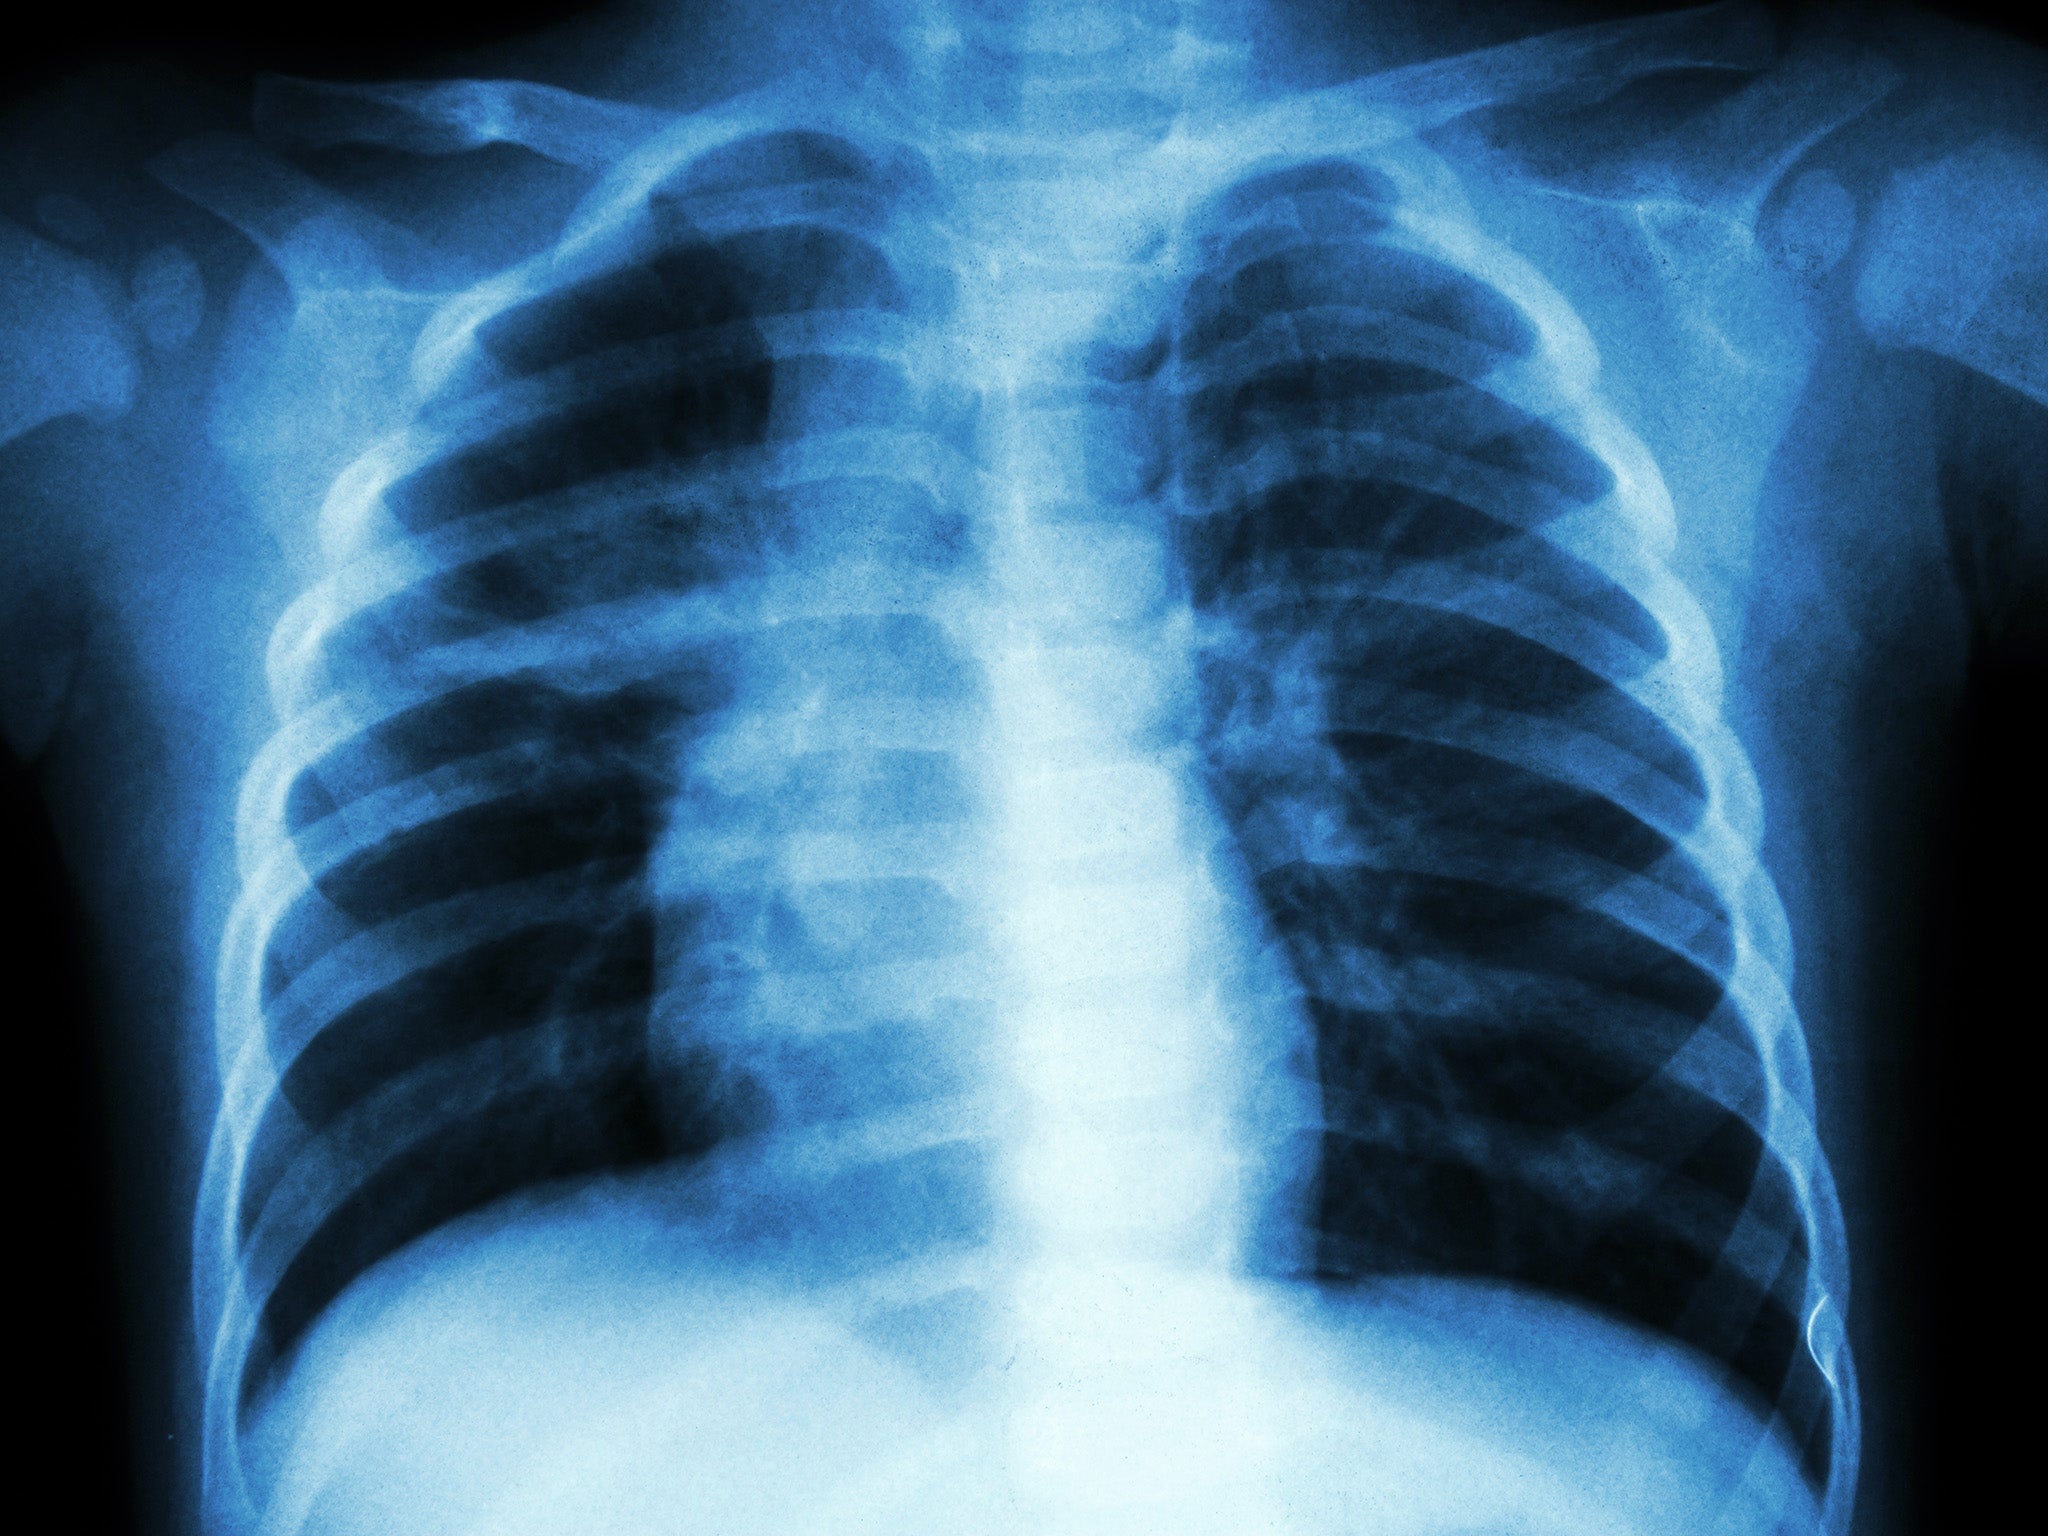 X-ray of an infected lung with tuberculosis